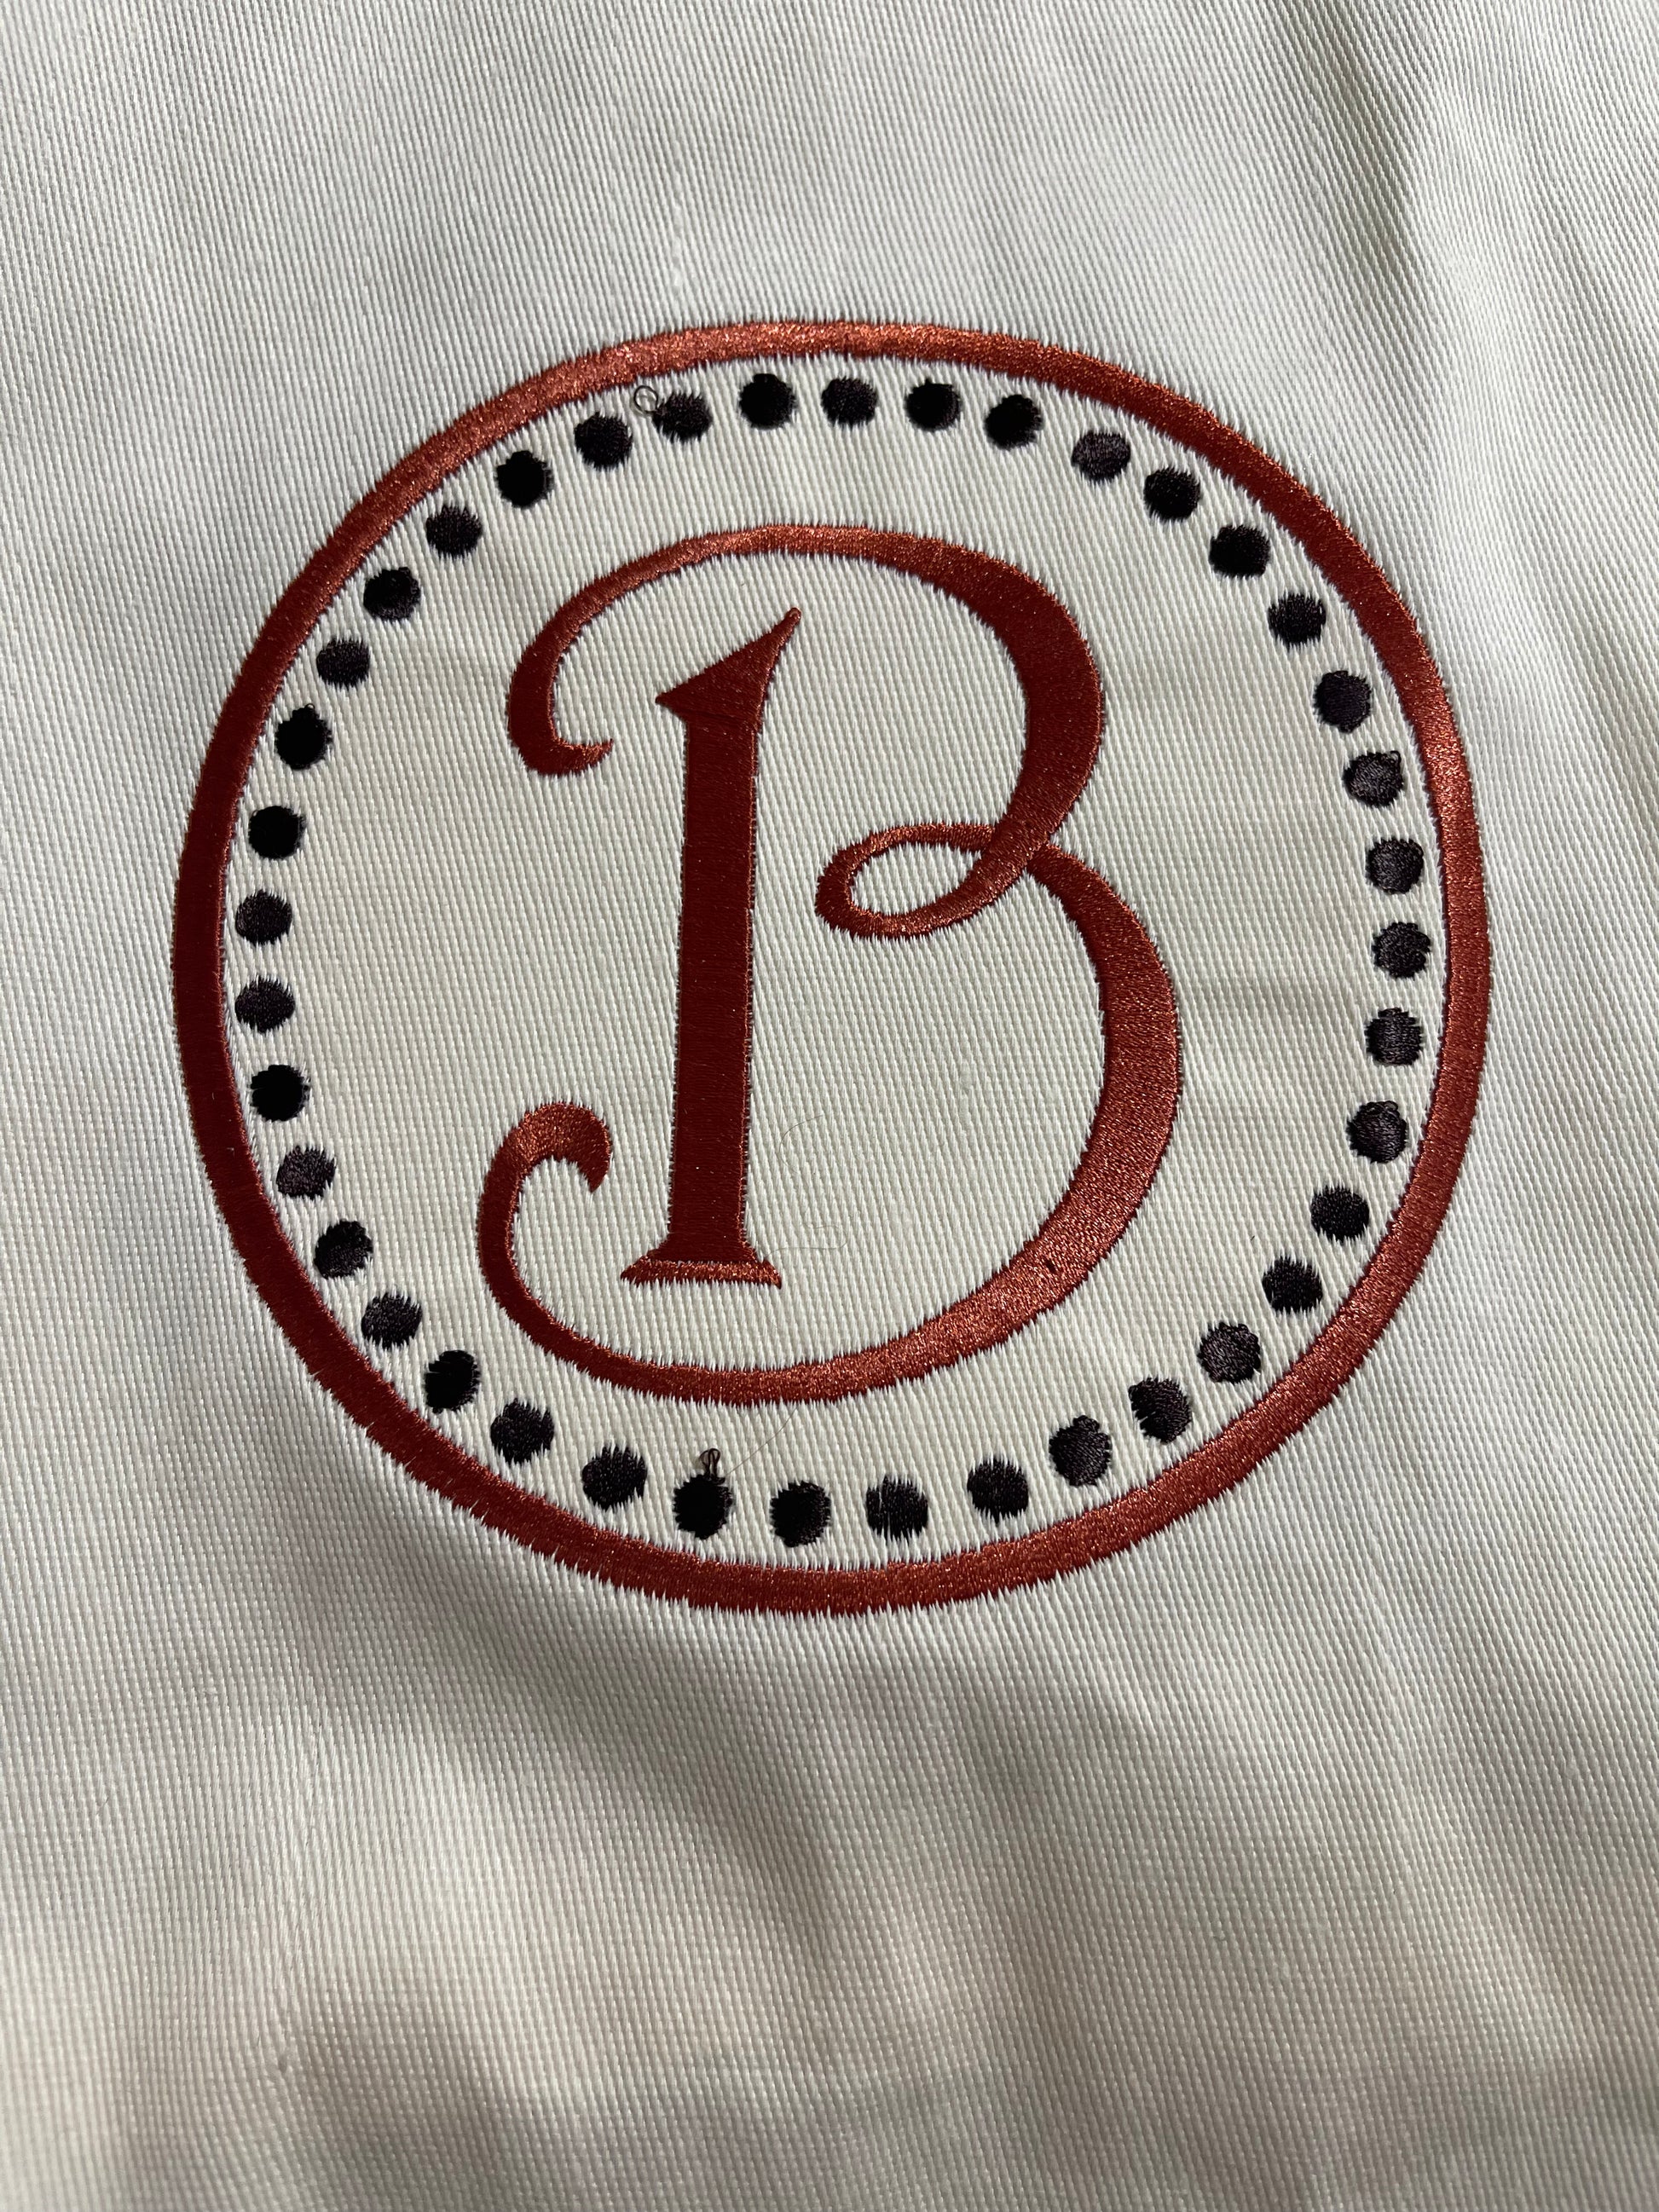 Personalized Apron - Southern Grace Creations